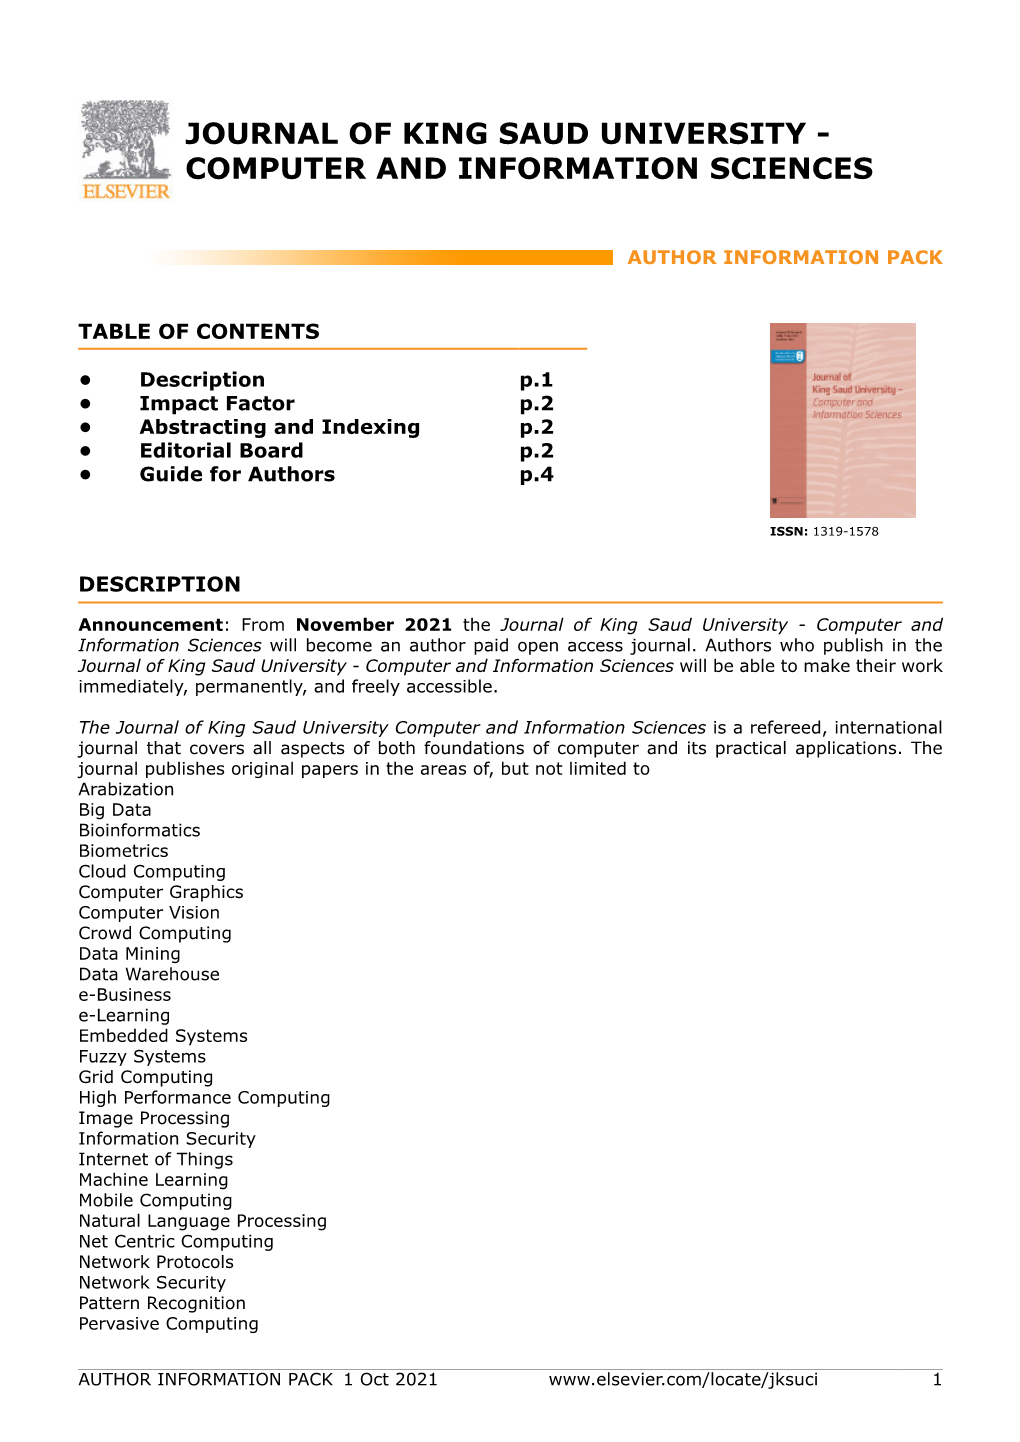 Journal of King Saud University - Computer and Information Sciences